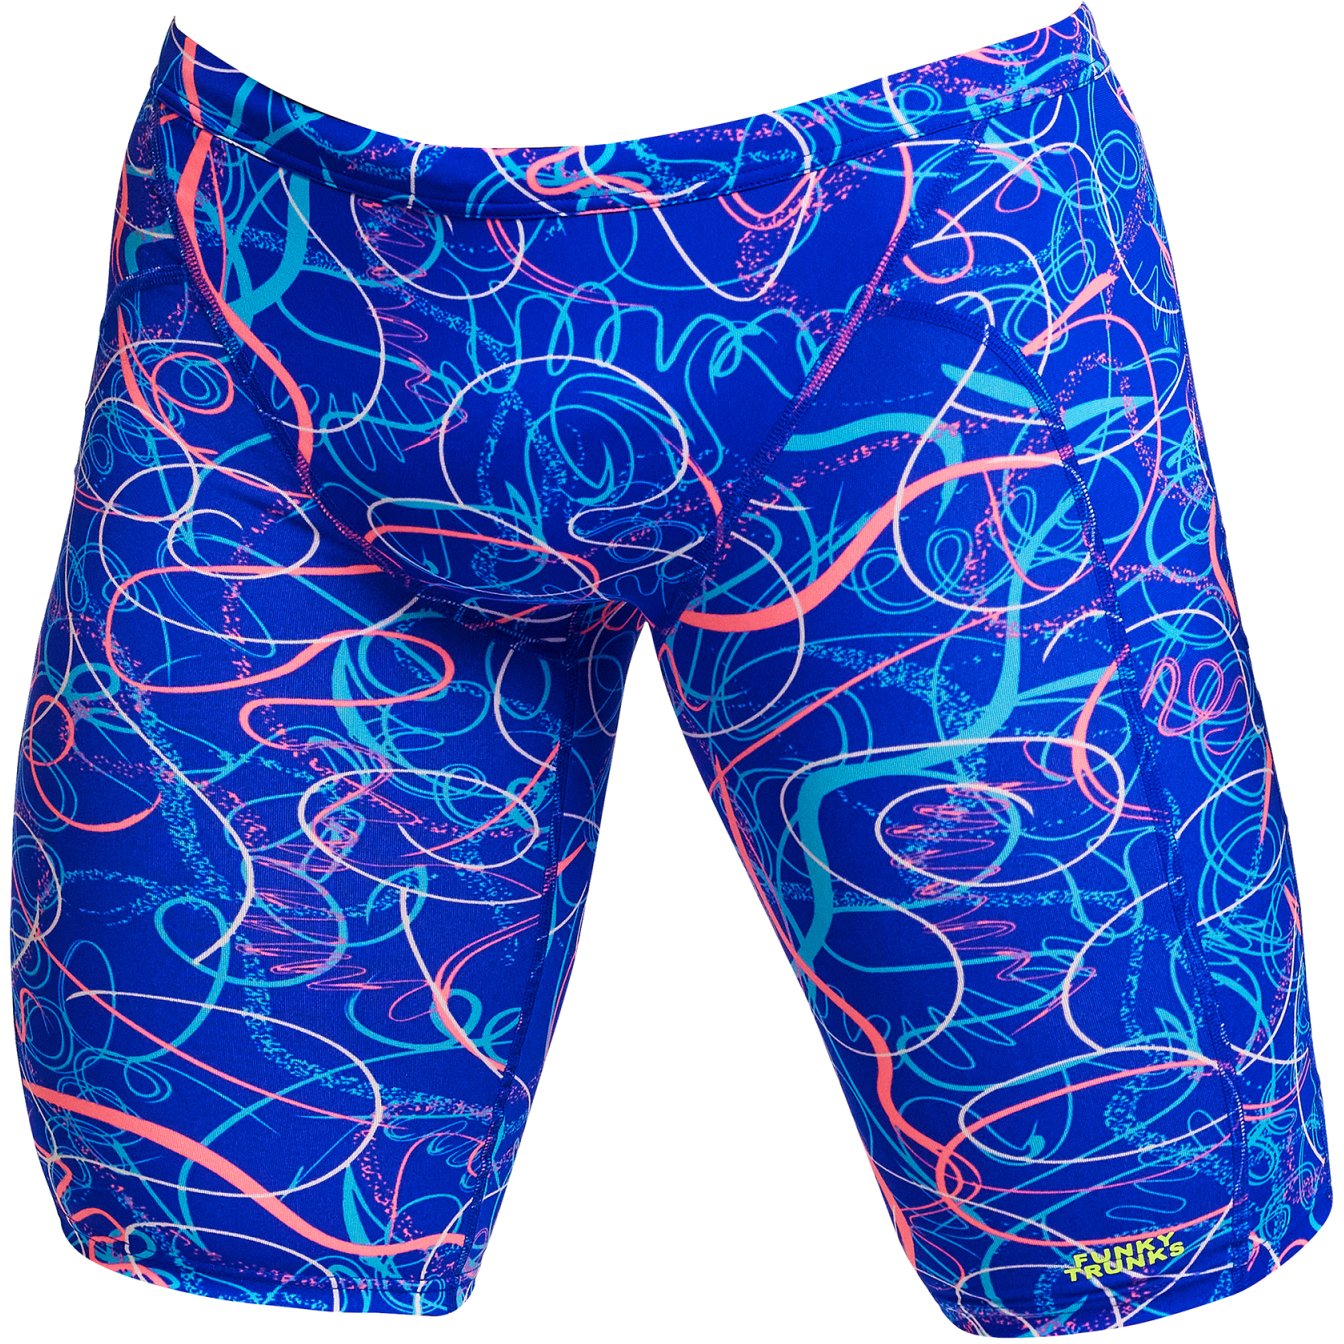 Funky Trunks Men's Training Jammers - Lashed | BIKE24